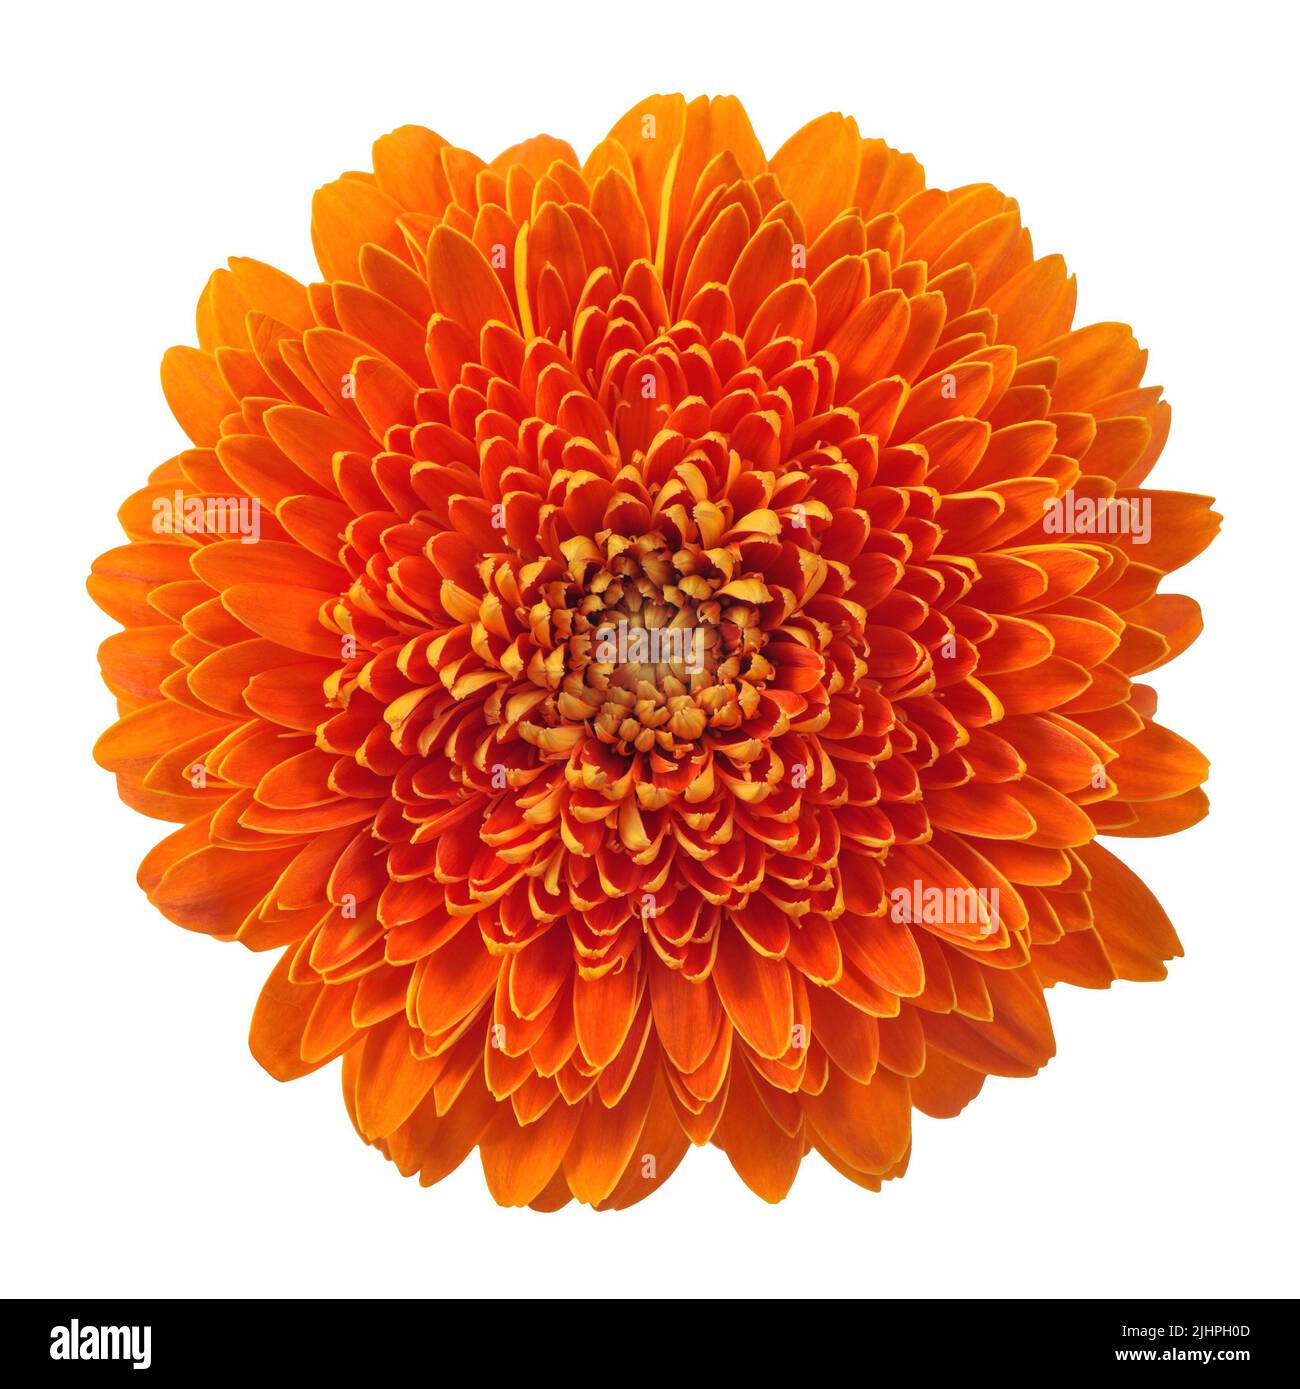 Gerbera flower head isolated on white background. Orange colored bloom Stock Photo